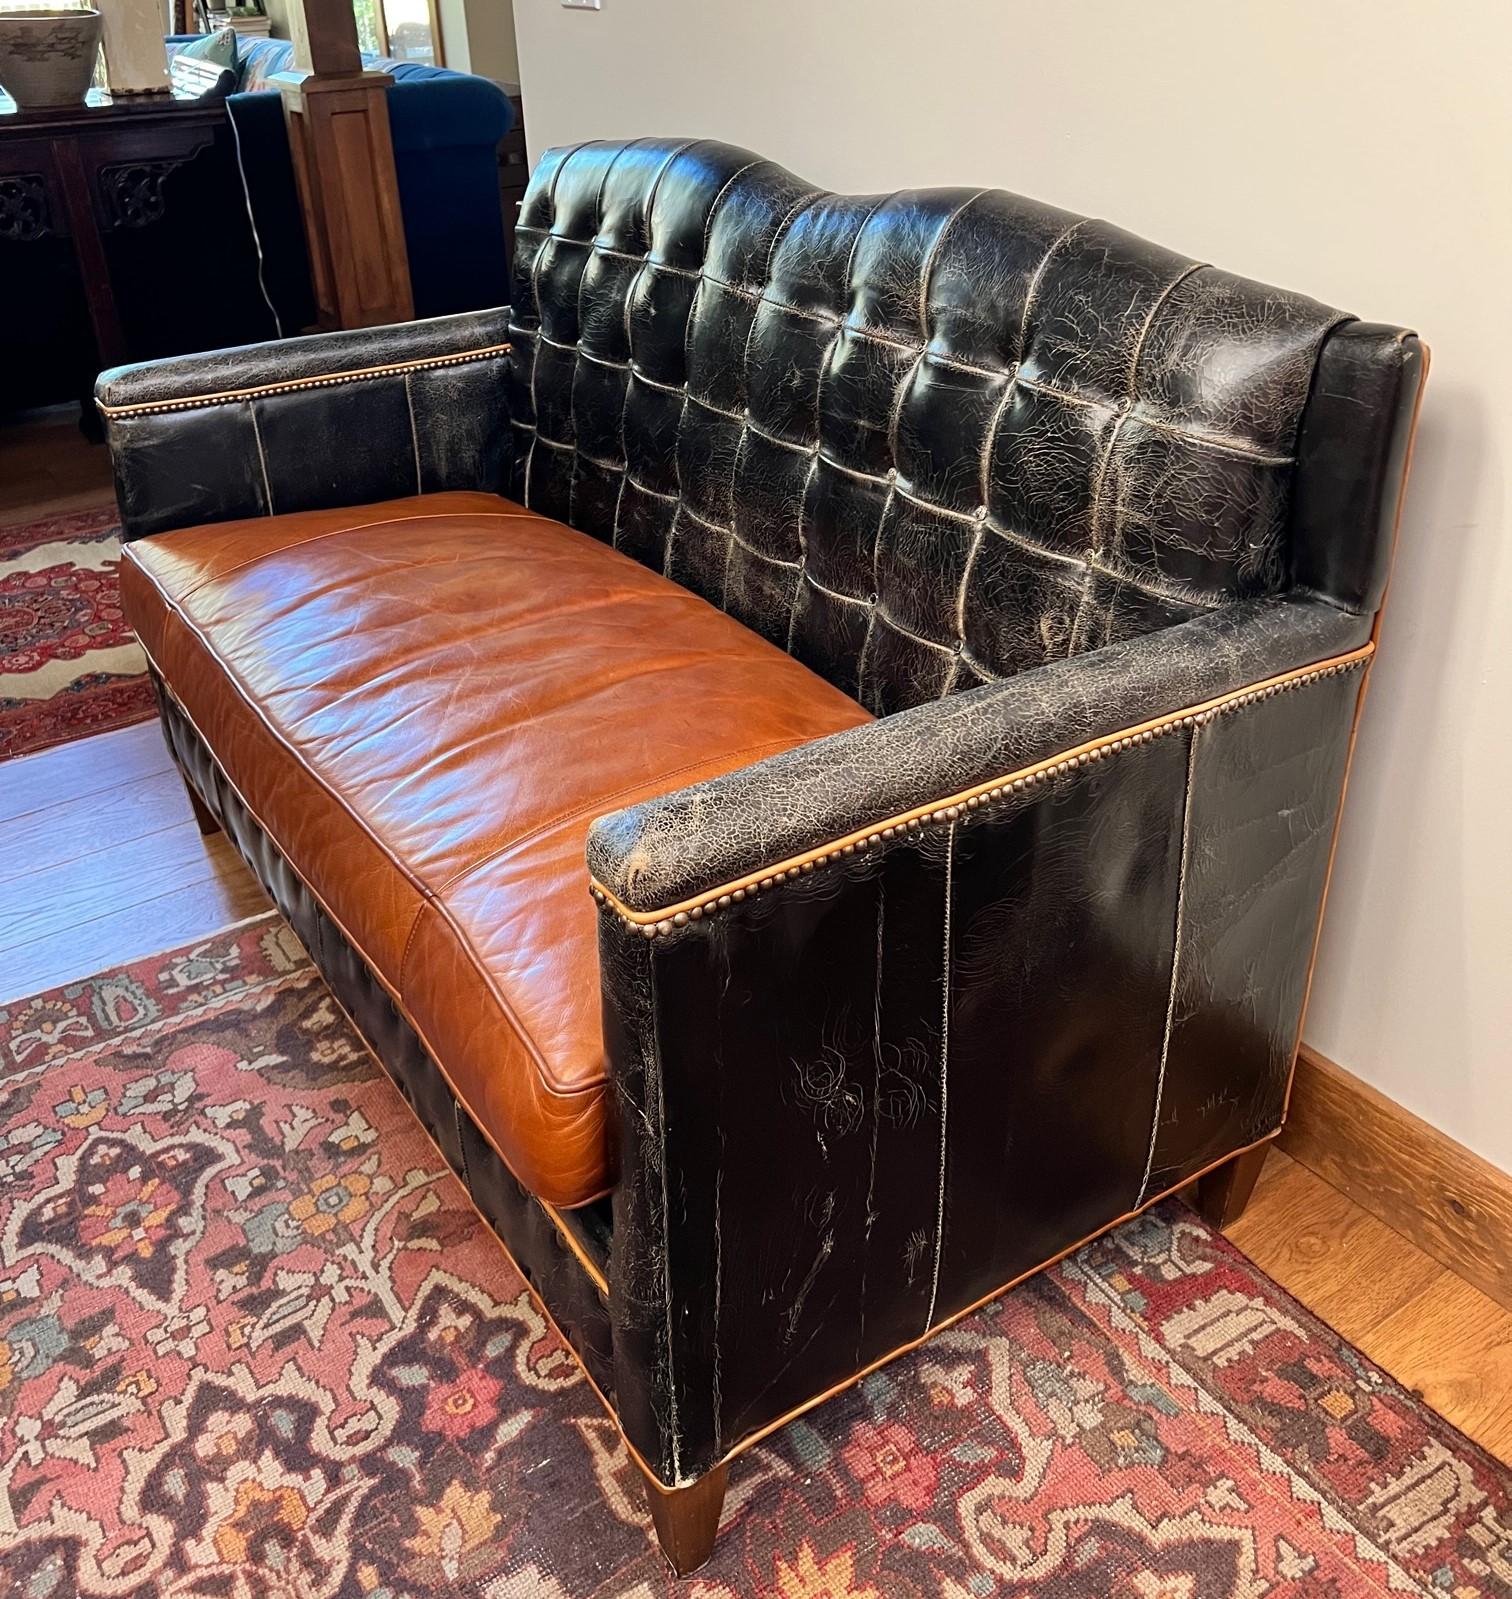 Vintage sofa/loveseat in deliberately distressed black leather with a caramel leather seat, piping and nail head trim.  The button tufting is very geometric and is only on the sofa back. The remaining leather is in panels. The sofa is raised on